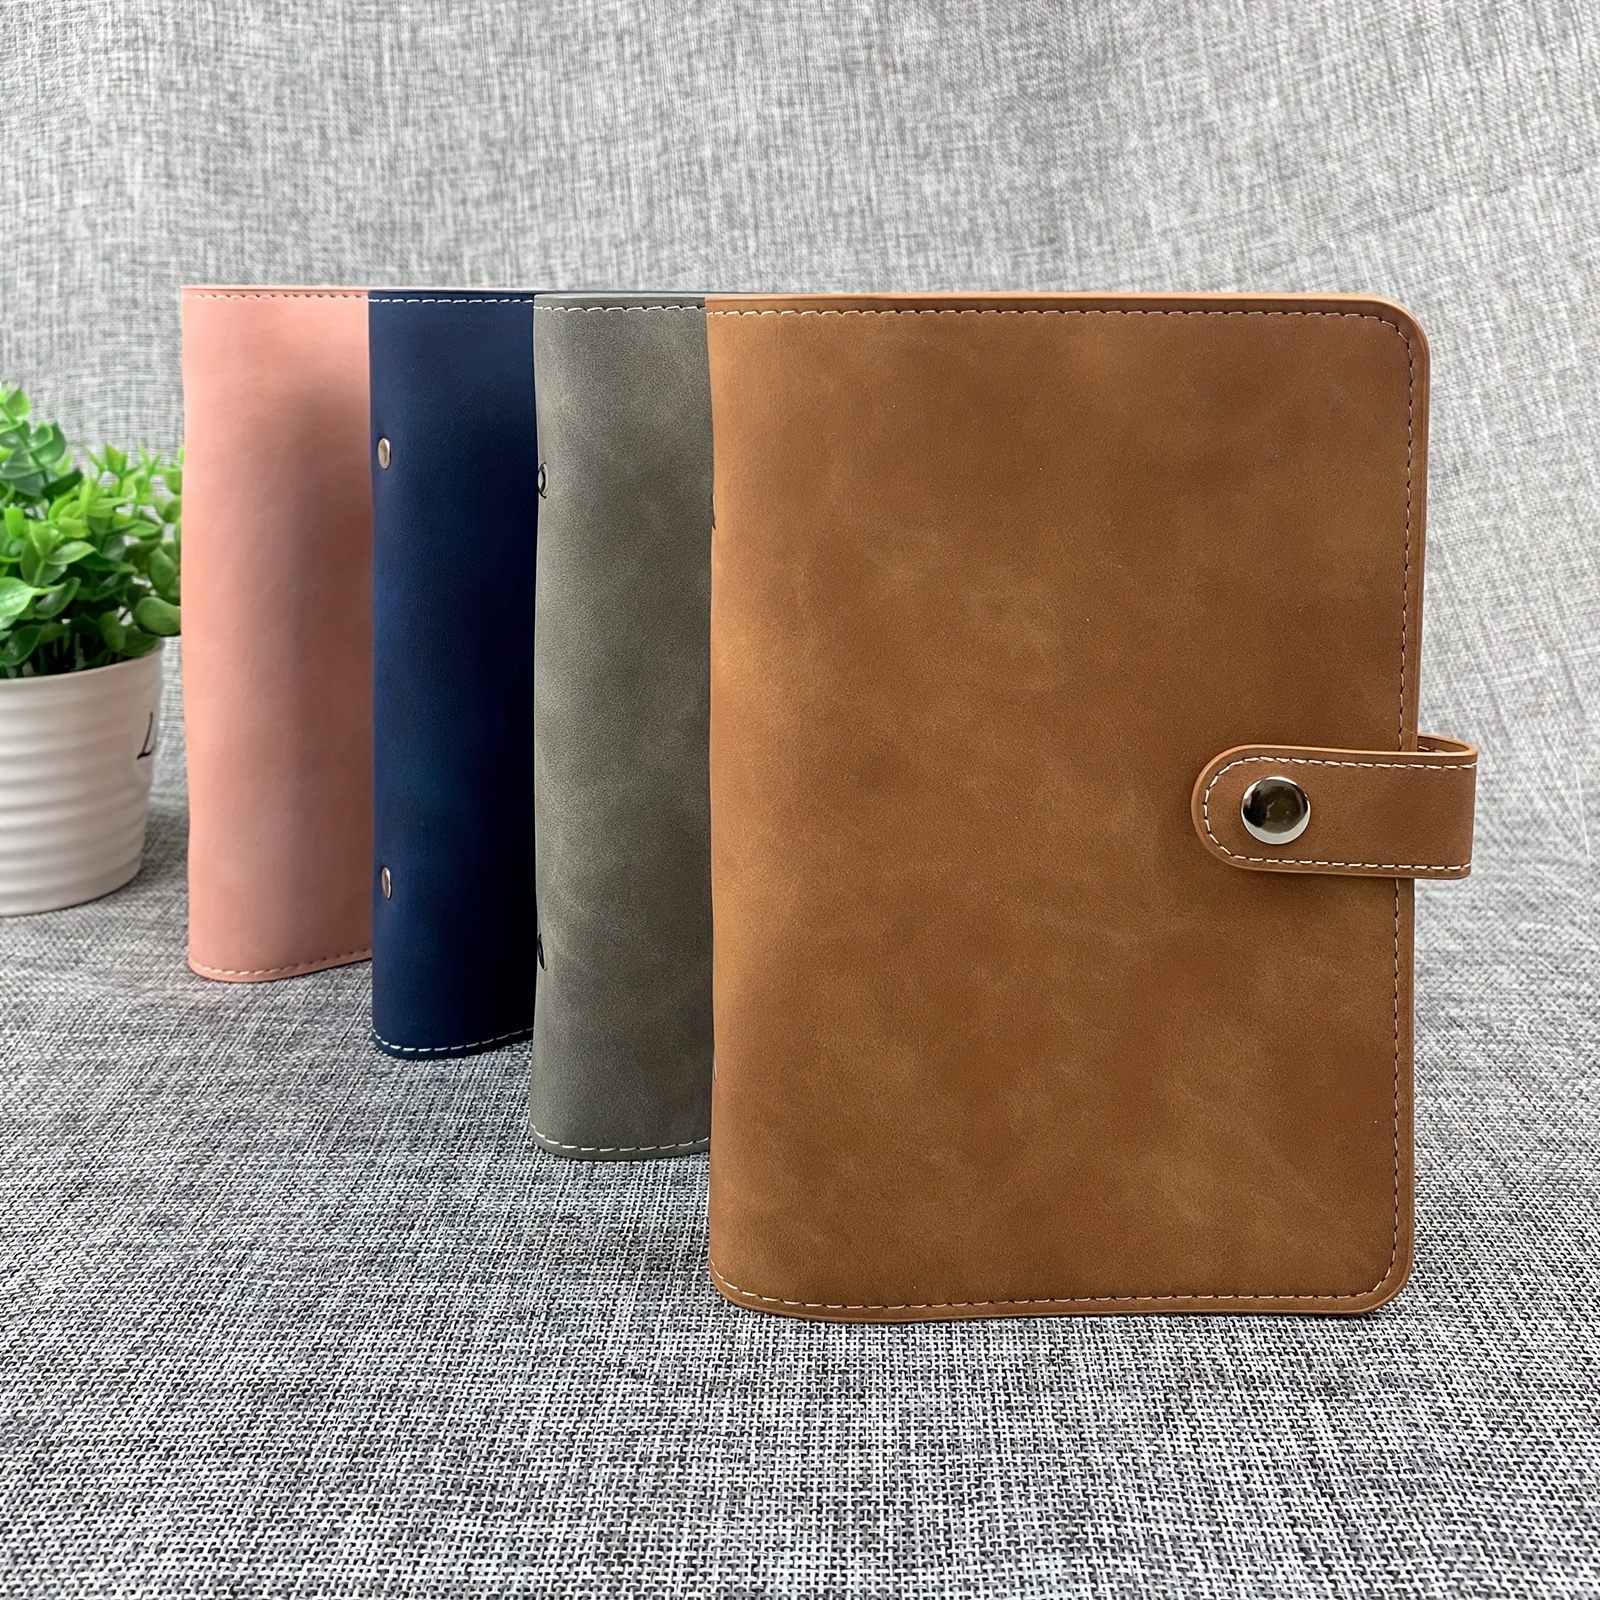 A6 PU Leather Notebook Binder Refullable 6 Ring Binder for A6 Filler Paper,  Loose Leaf Personal Planner Binder Cover with Magnetic Buckle Closure (8  transparent zipper pockets+40 sheets of writing paper+Small stickers)